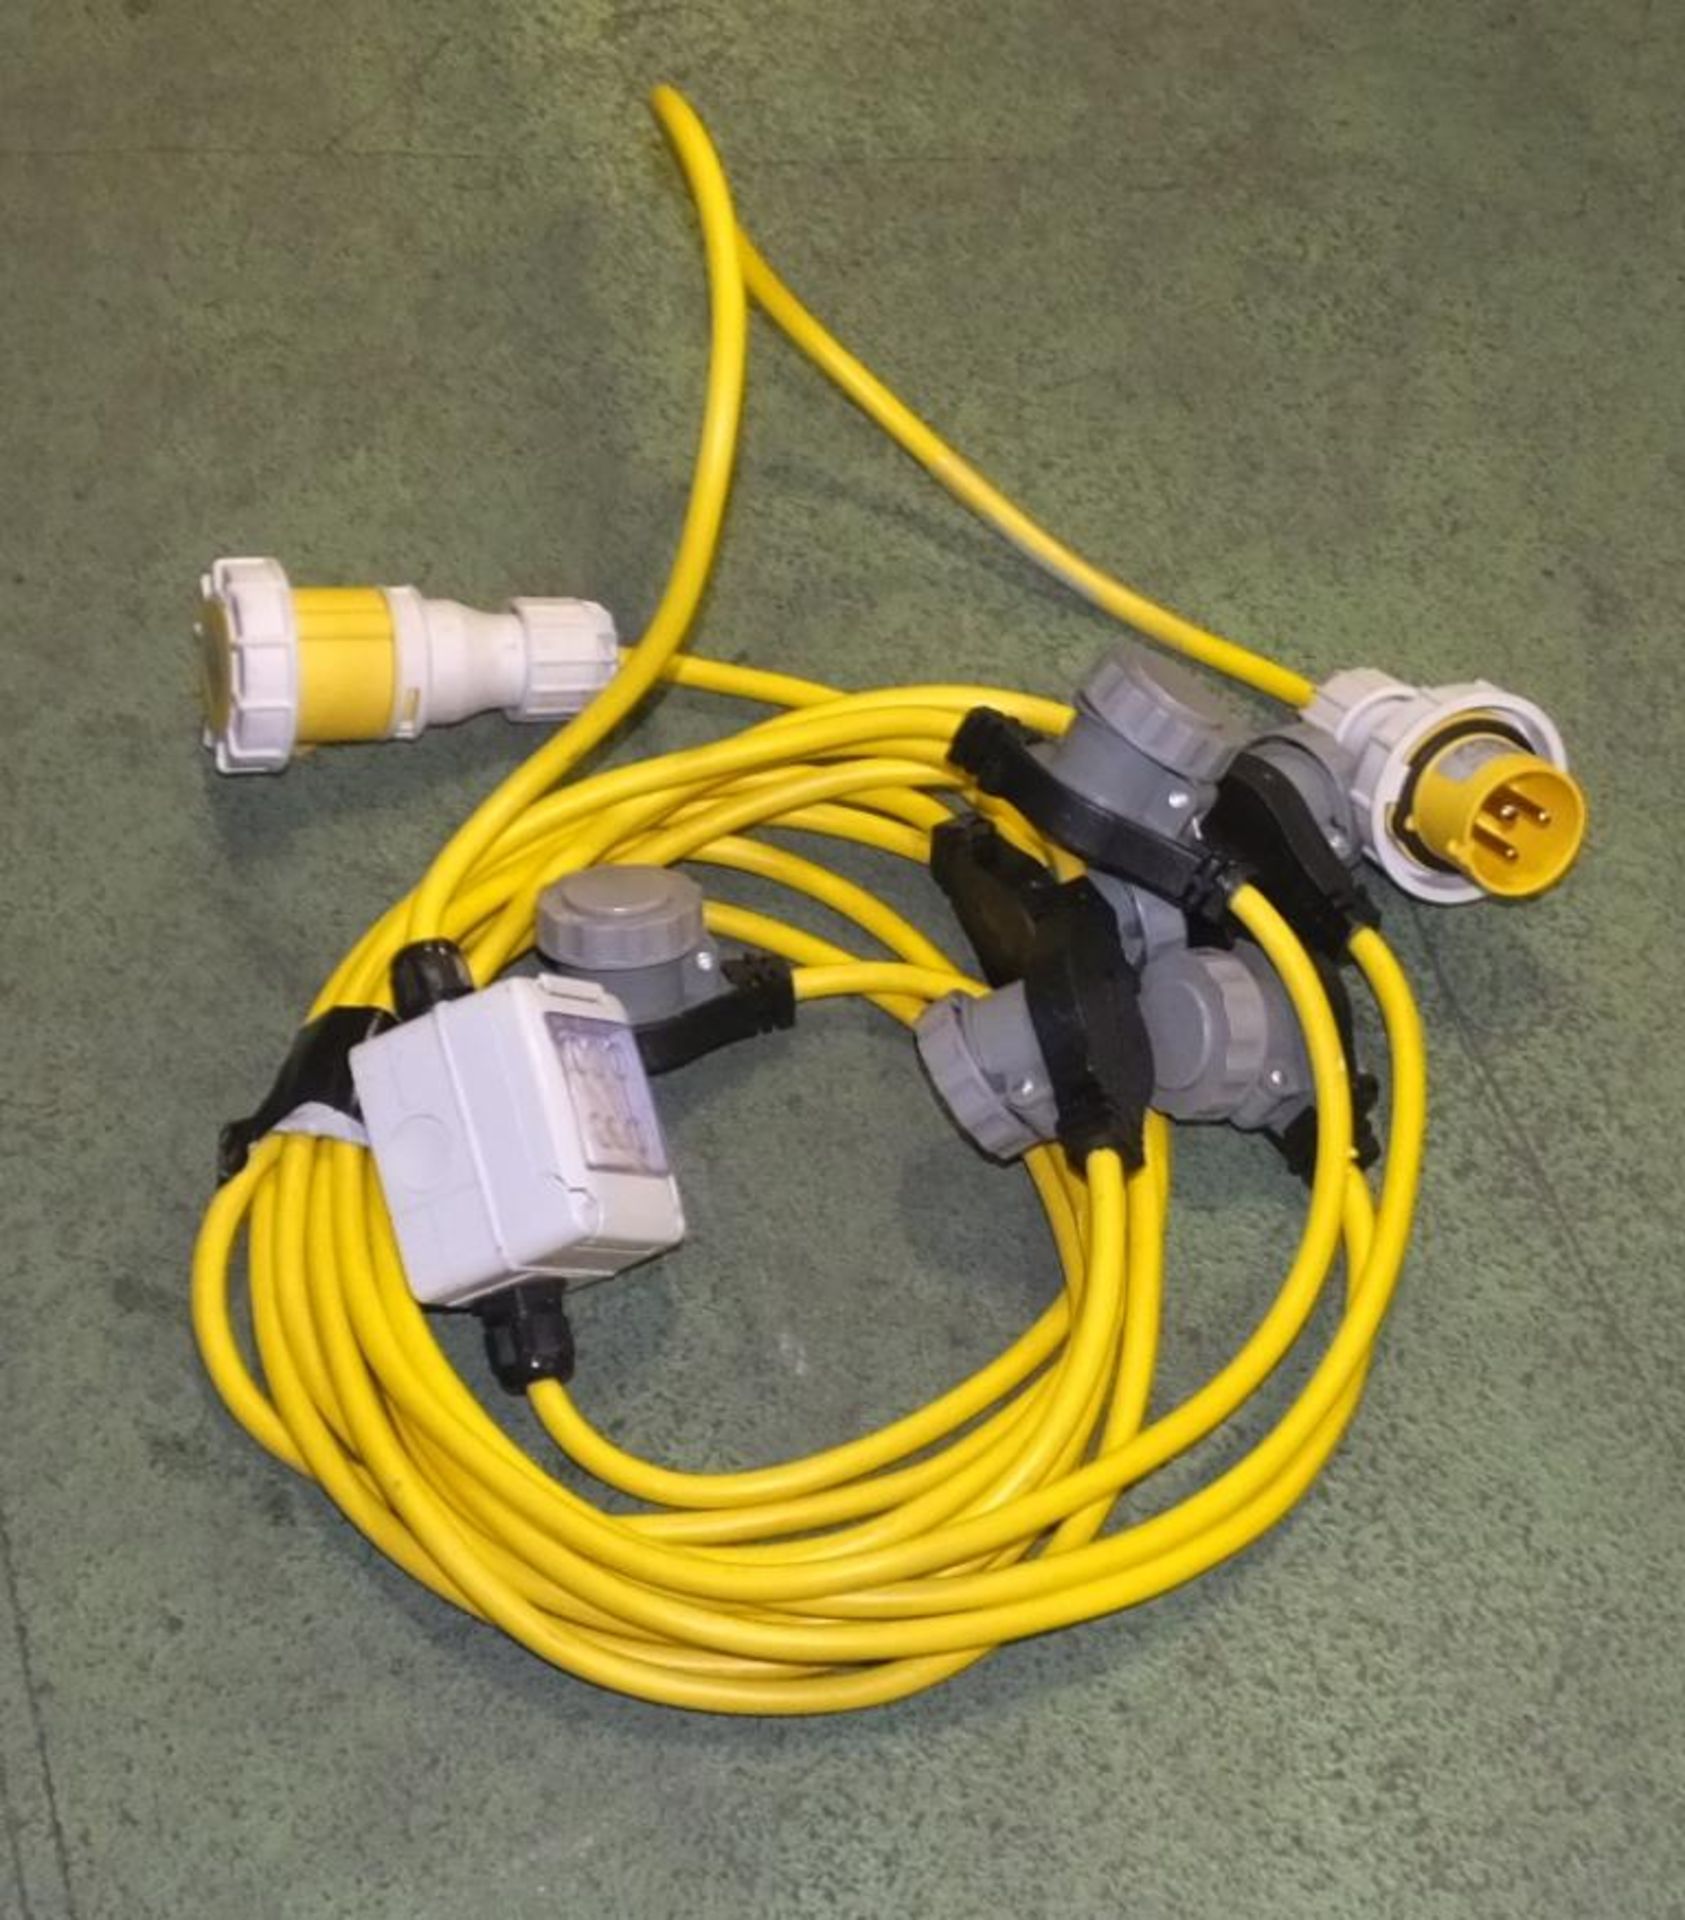 25x 110V extension cable assemblies - Image 4 of 4